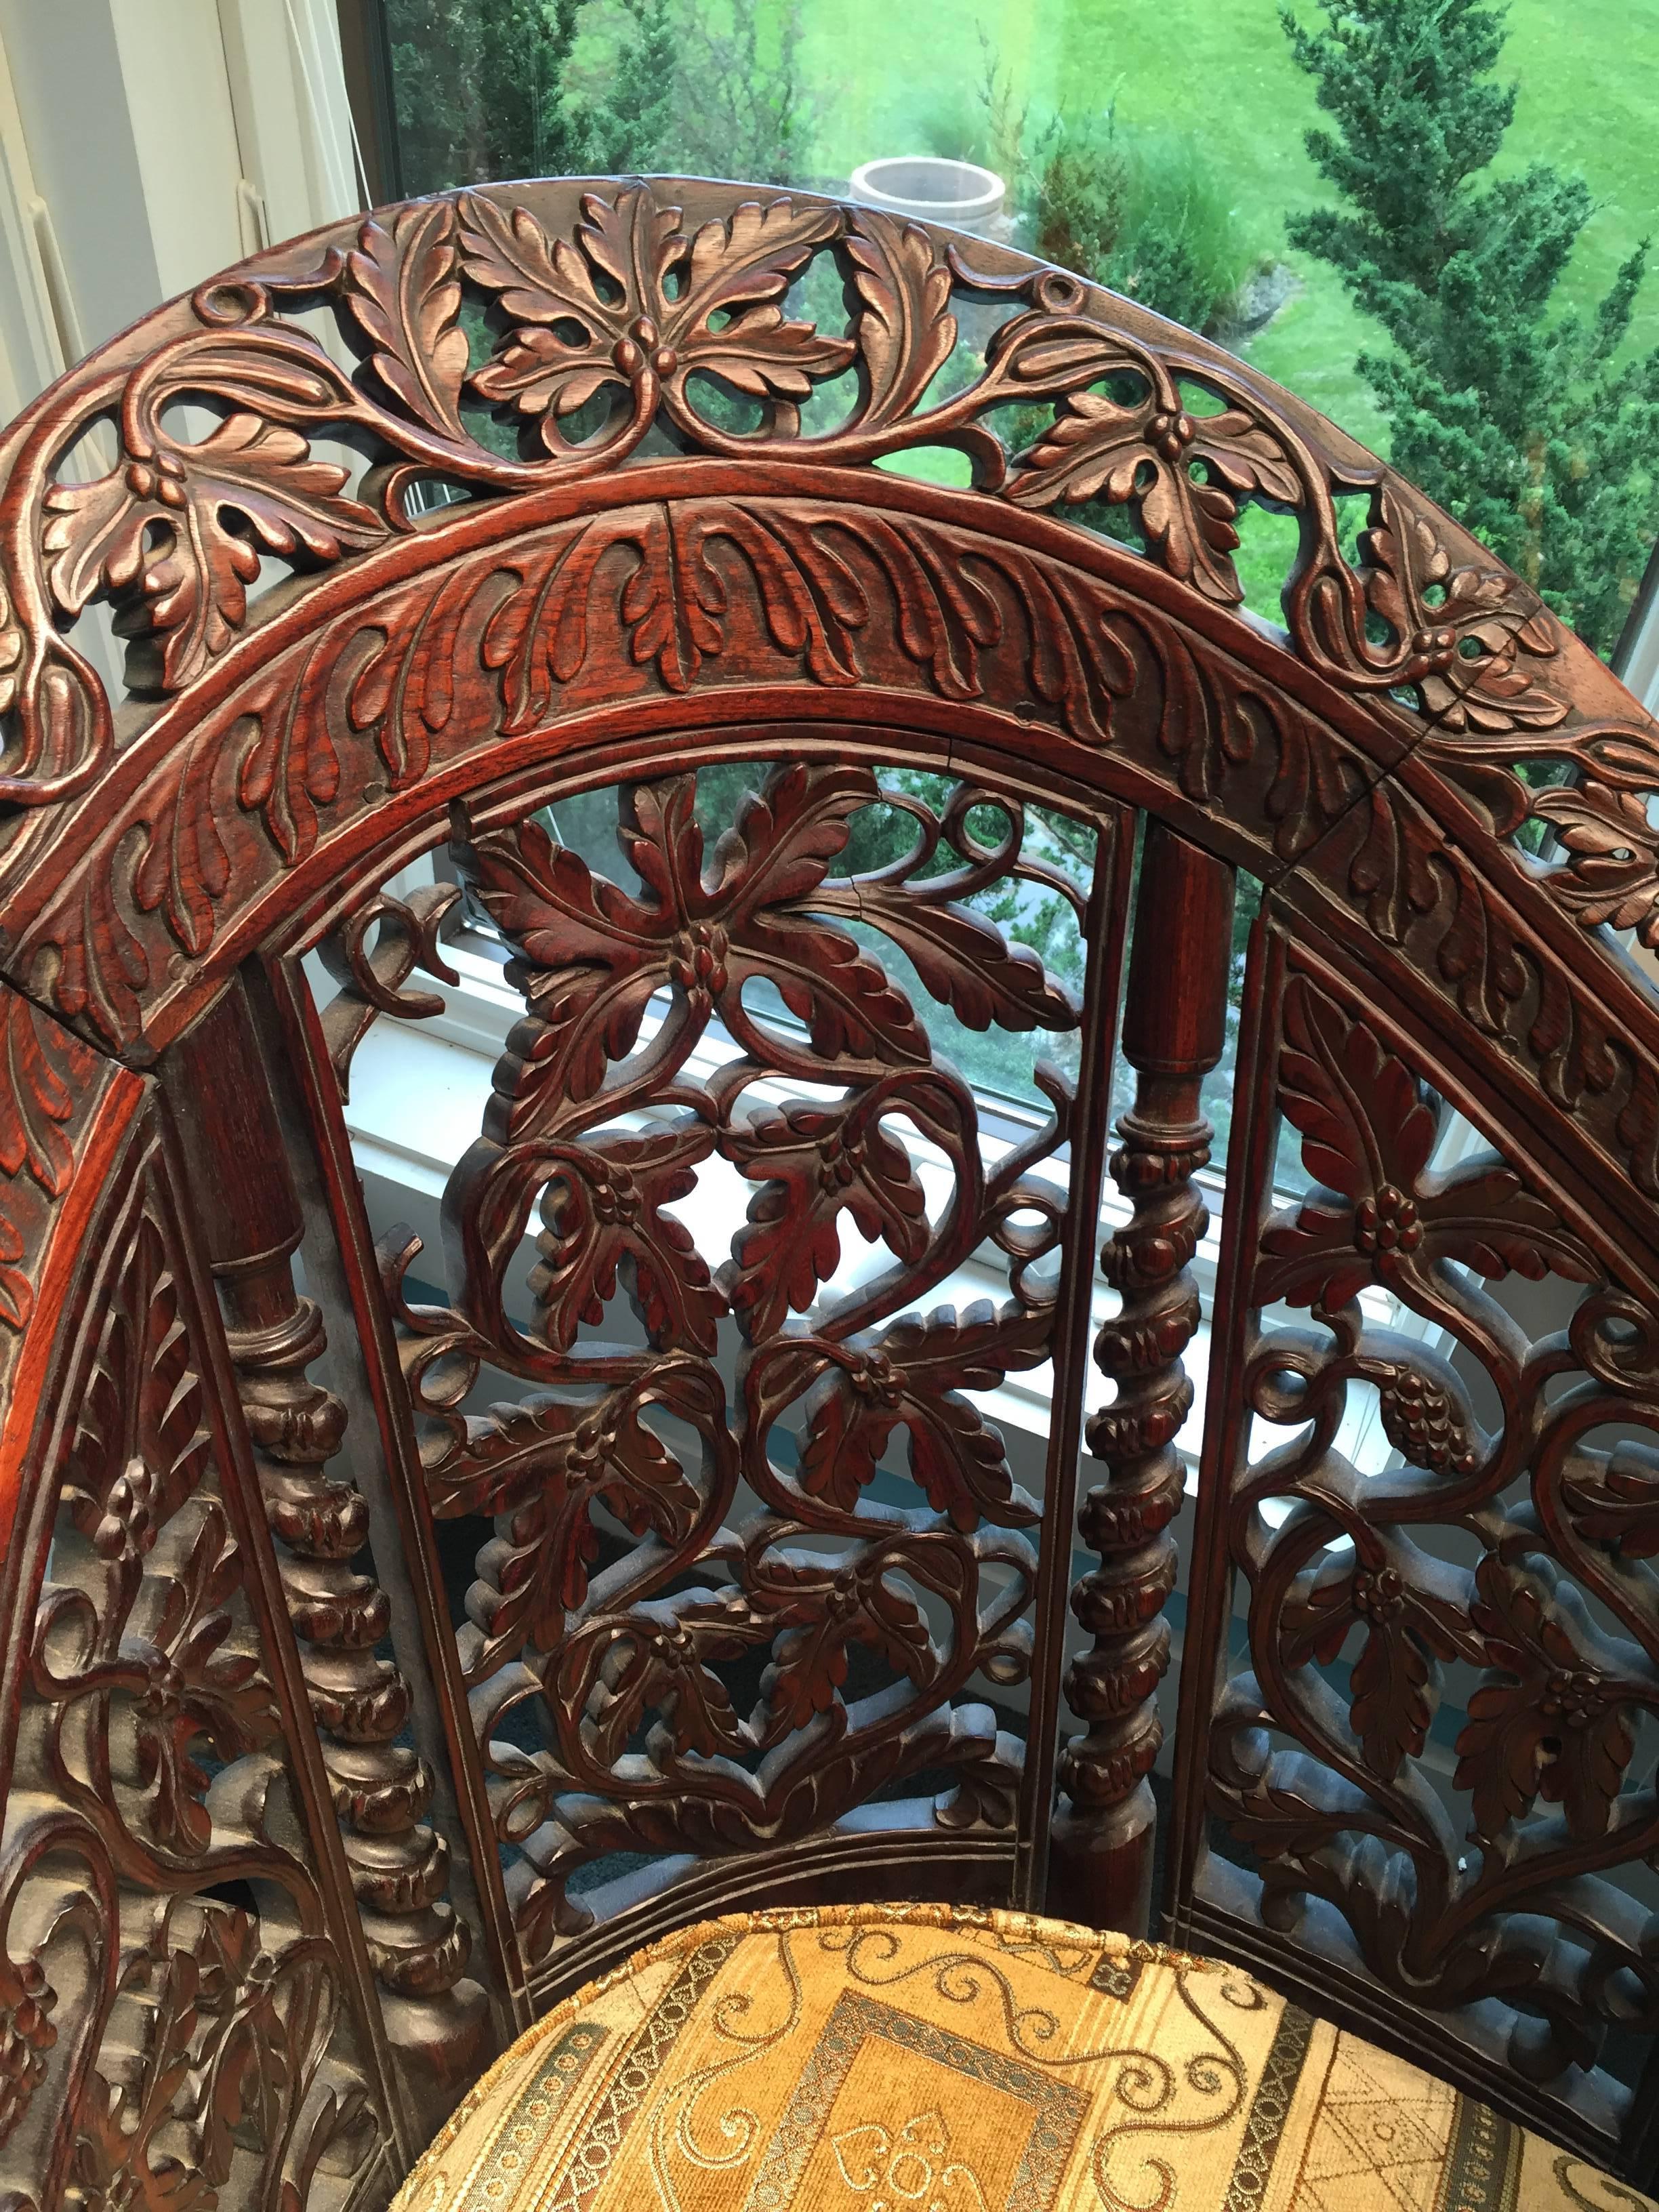 A highly decorative and hard to find Anglo-Indian finely carved and pierced rosewood or teak wood double high back settee with prolific flowers and grape design and with new seat and covering.

Period: circa 1860-1880, likely carved from the Bombay,